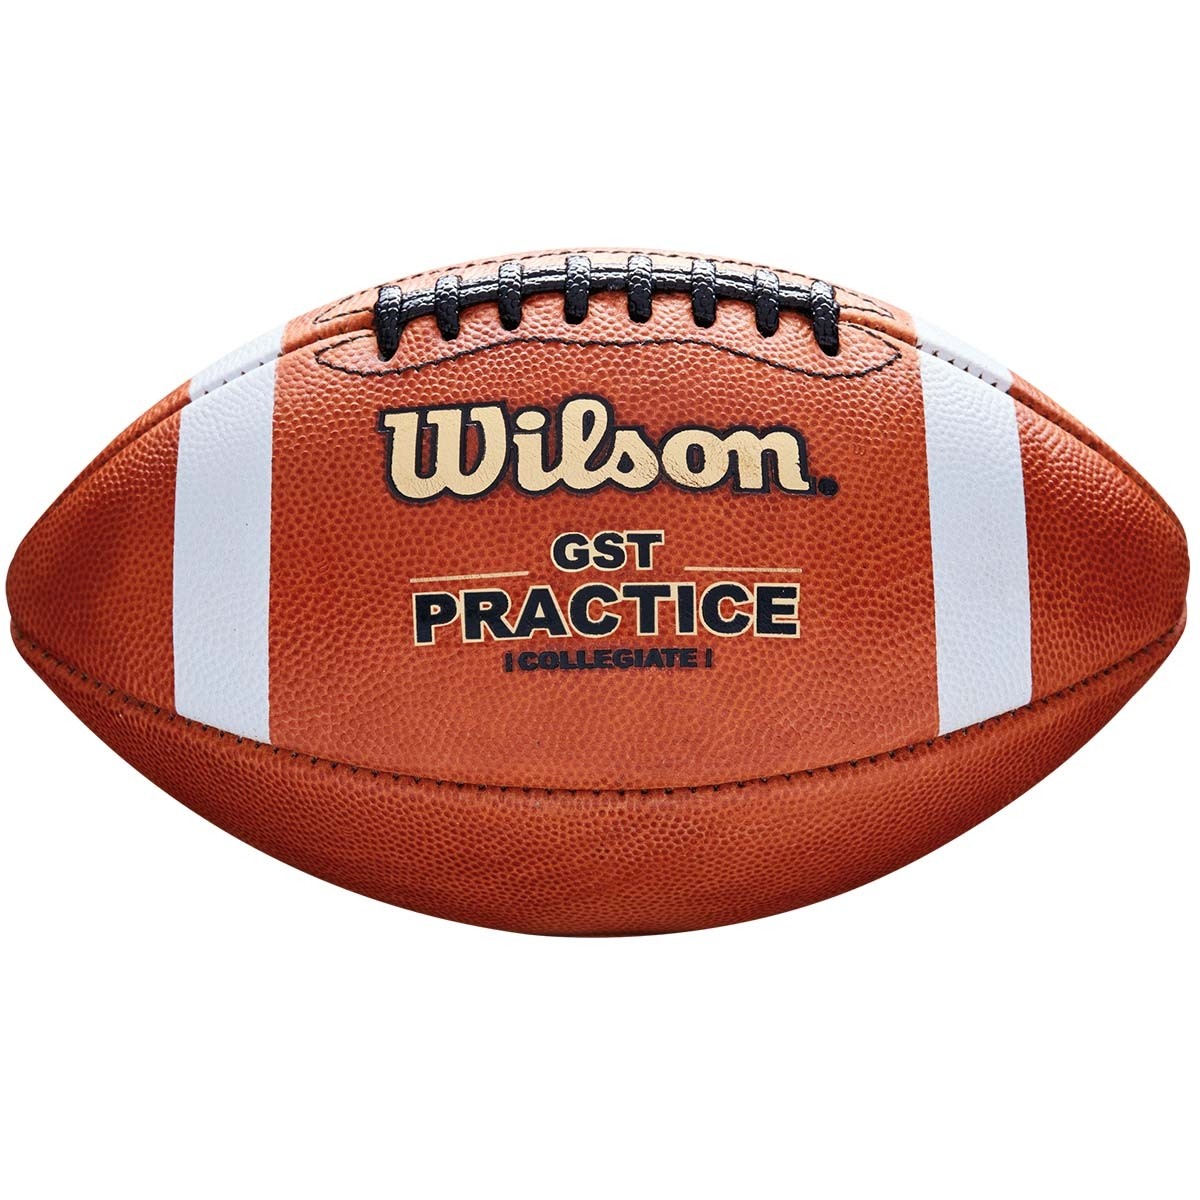 The 3 Greatest Nfl Superbowl Records For Passing wilson-gst-practice-football-0e2